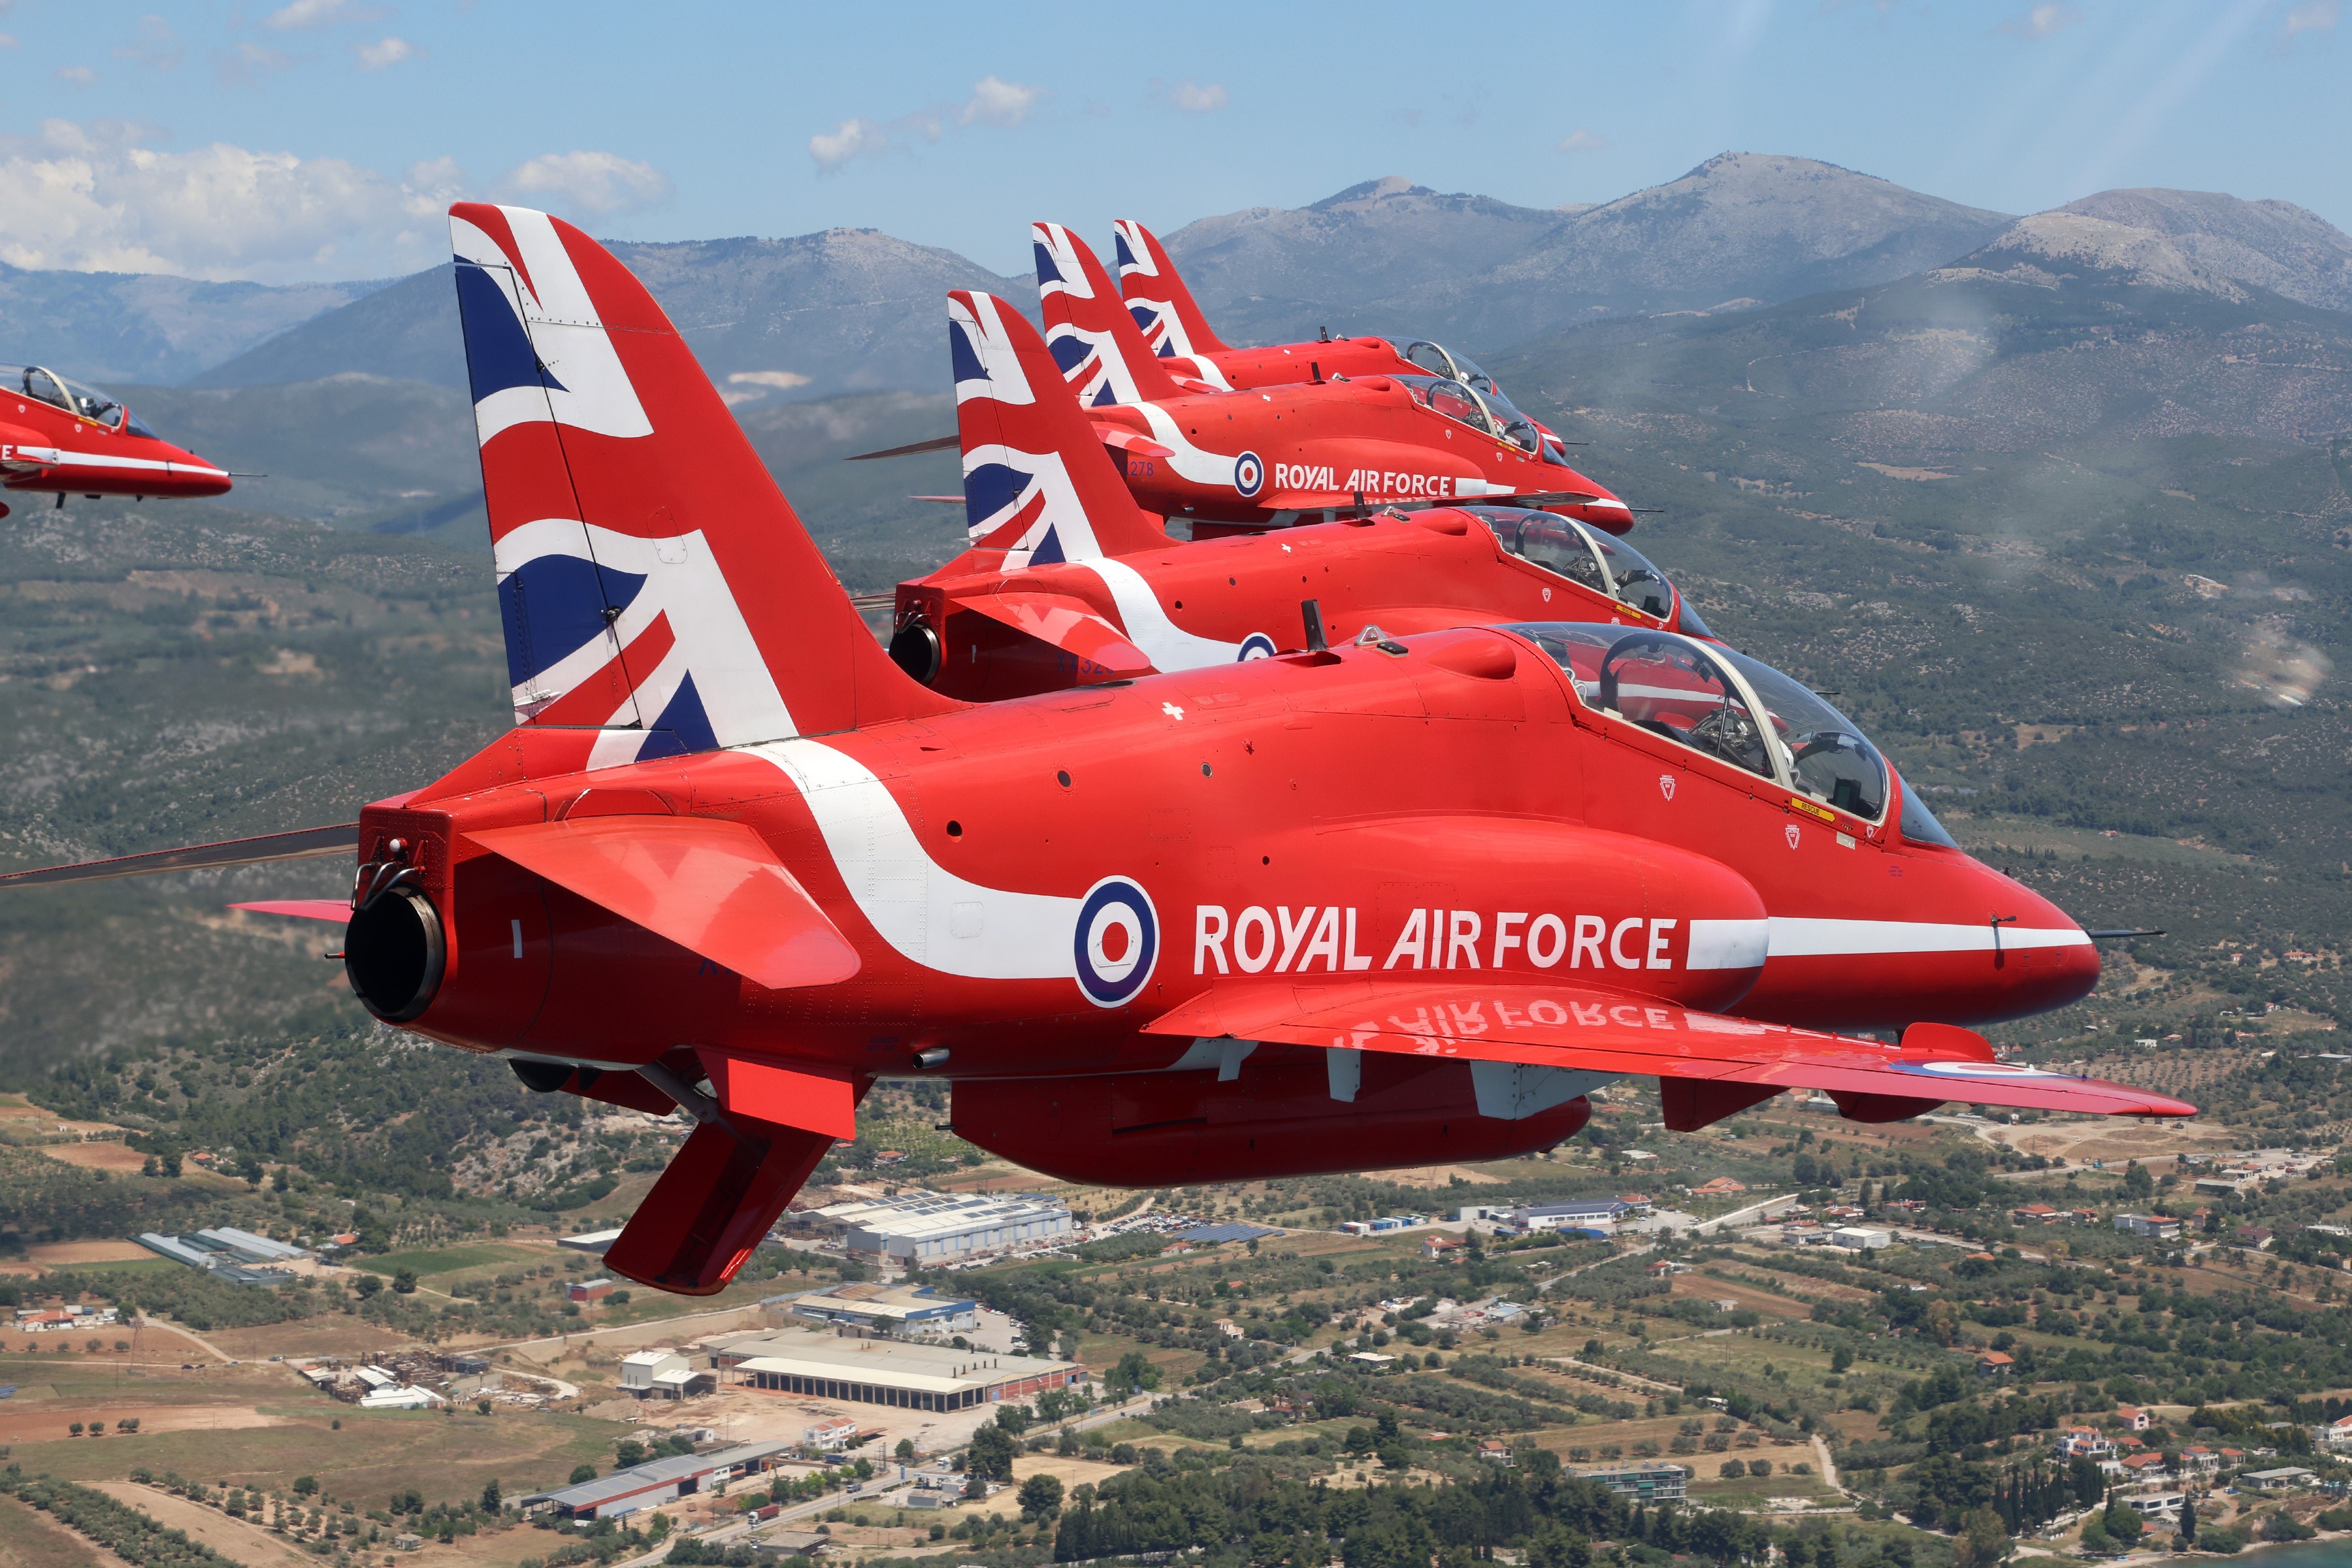 Image shows the Red Arrows in flight over mountains.